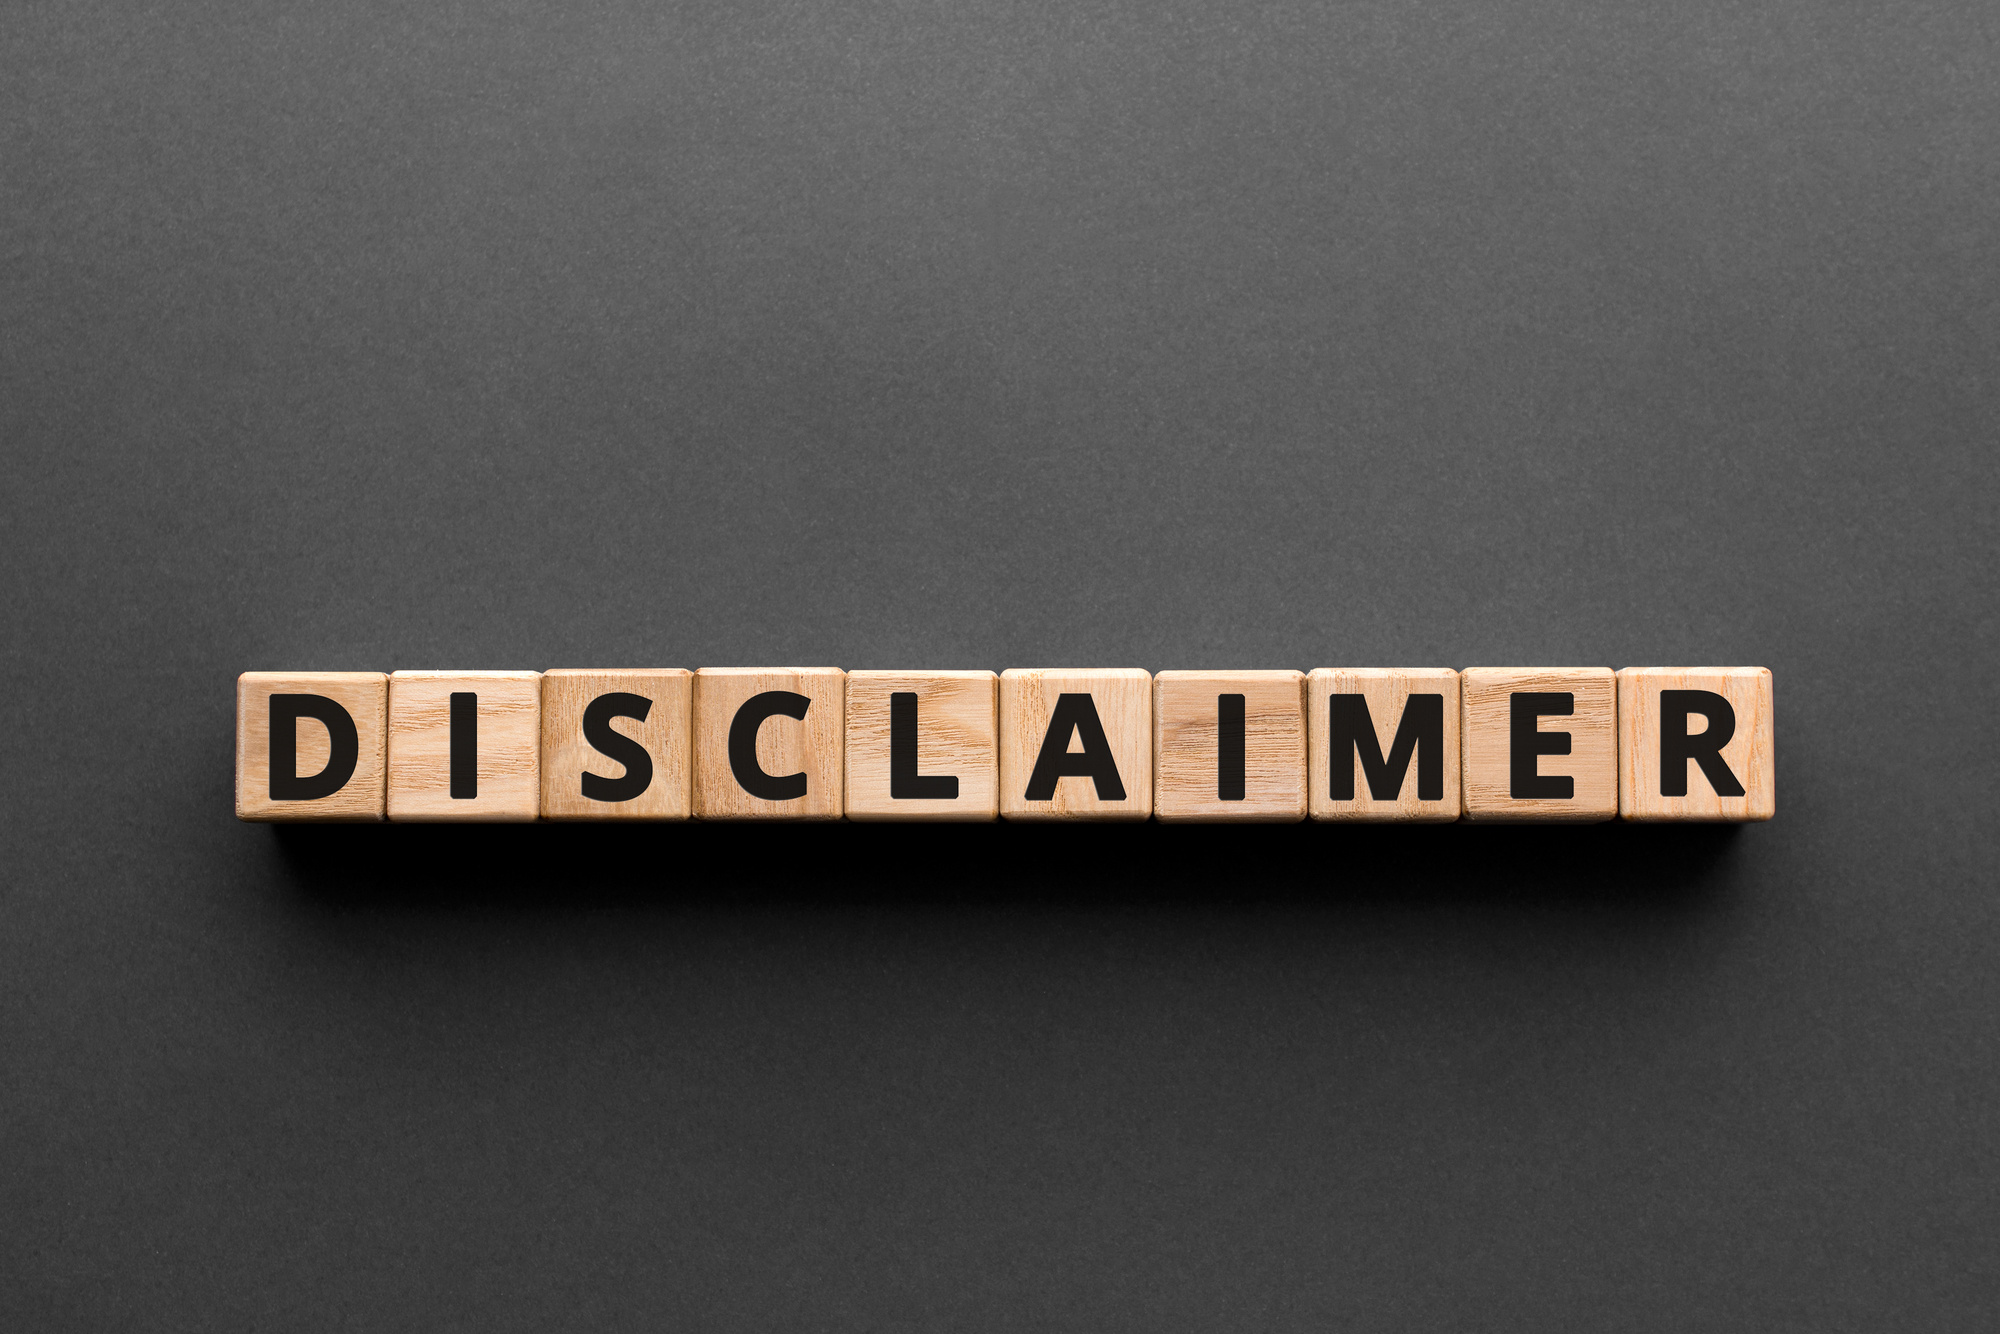 Disclaimer - words from wooden blocks with letters